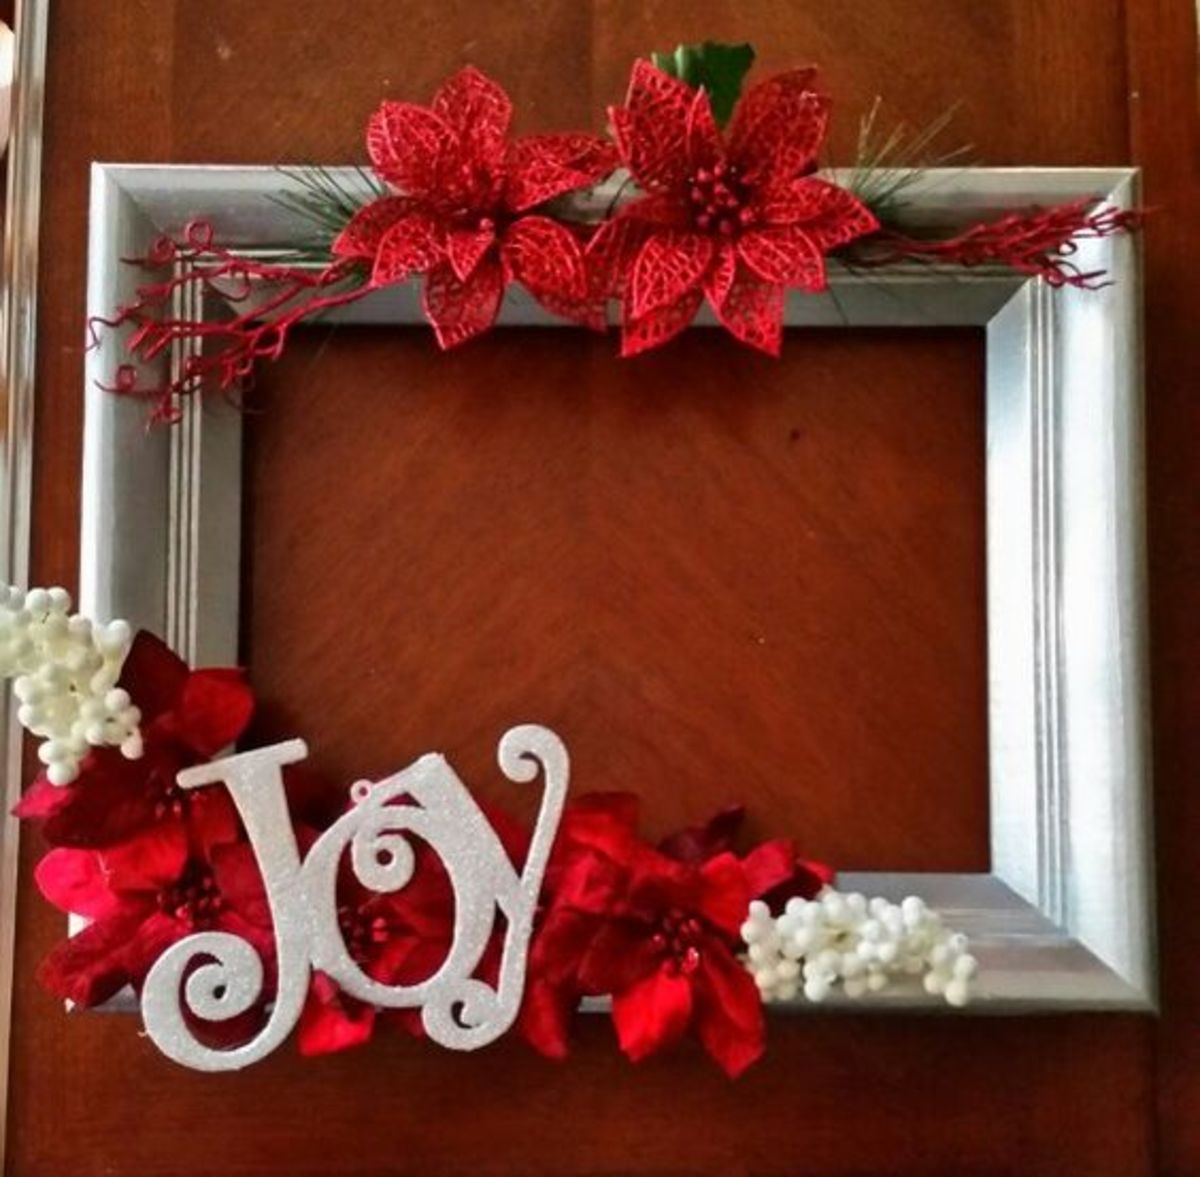 Silver "Joy" Picture Frame Wreath With Poinsettias